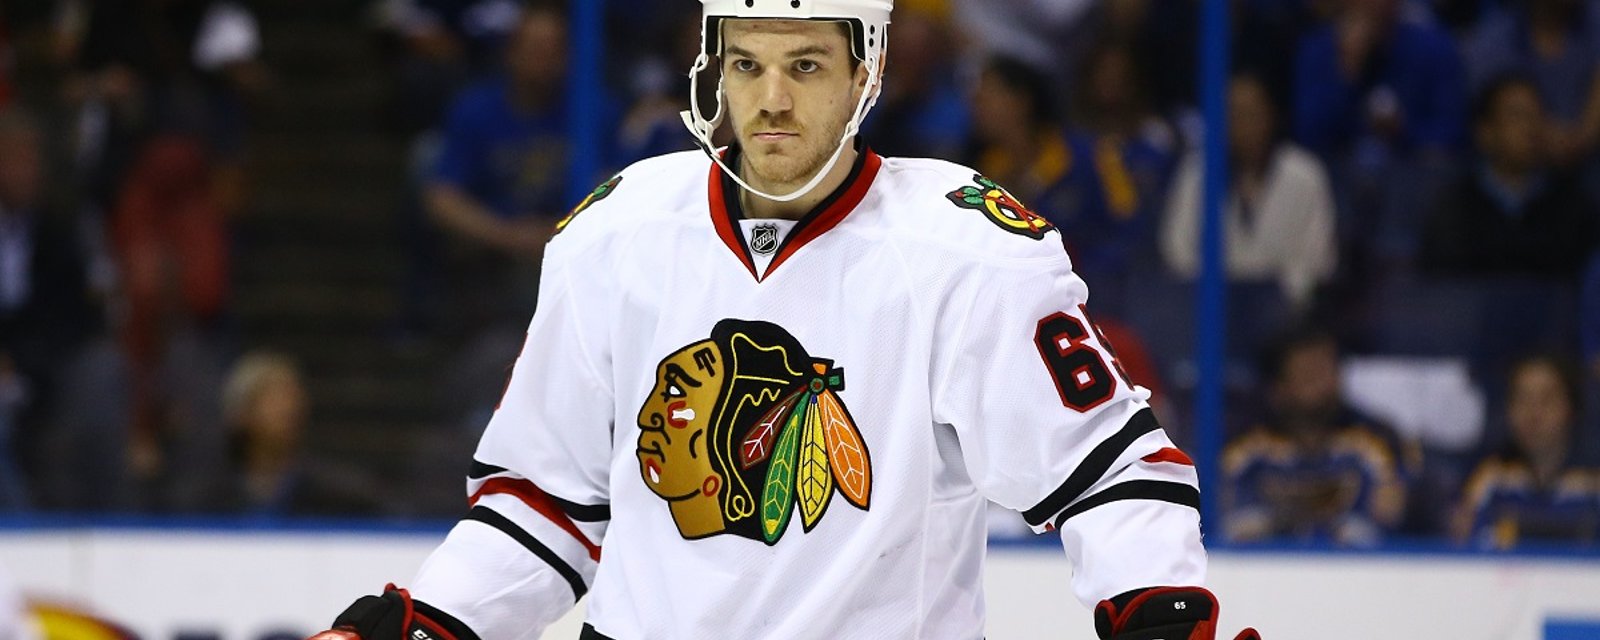 Ugly hit from Andrew Shaw in preseason could lead to potential suspension.